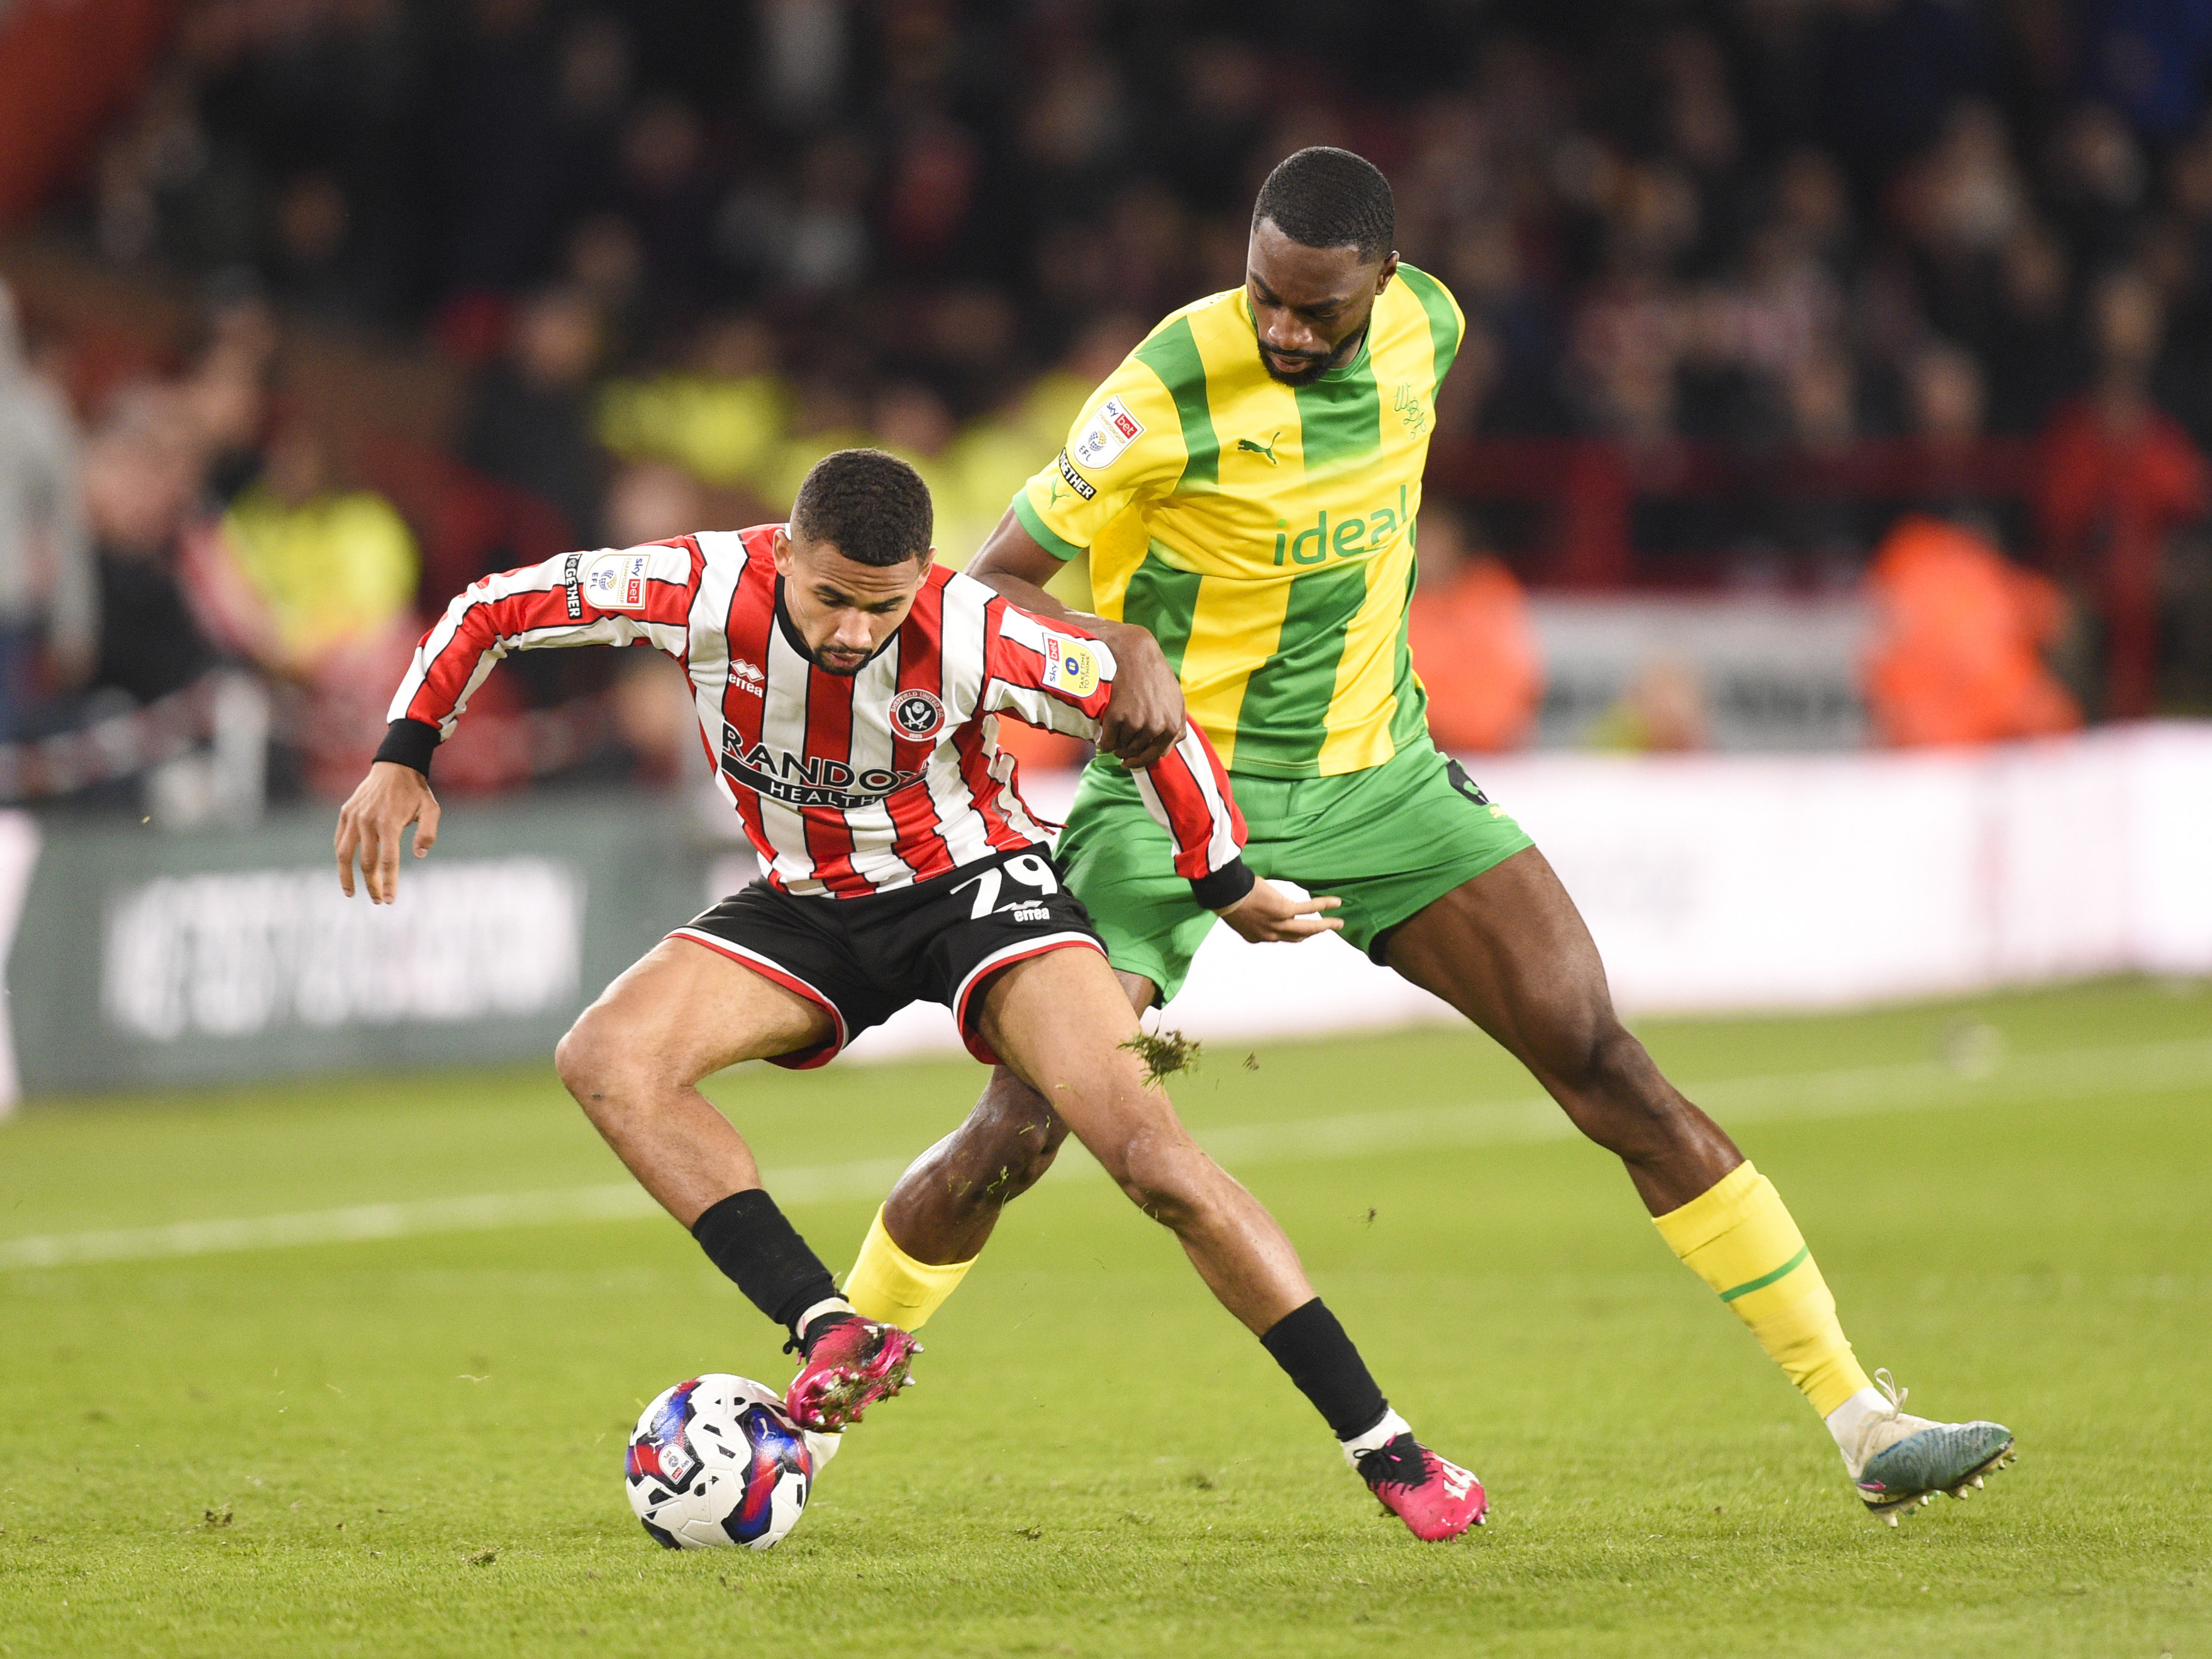 An image of Semi Ajayi battling for the ball against a Sheffield United player